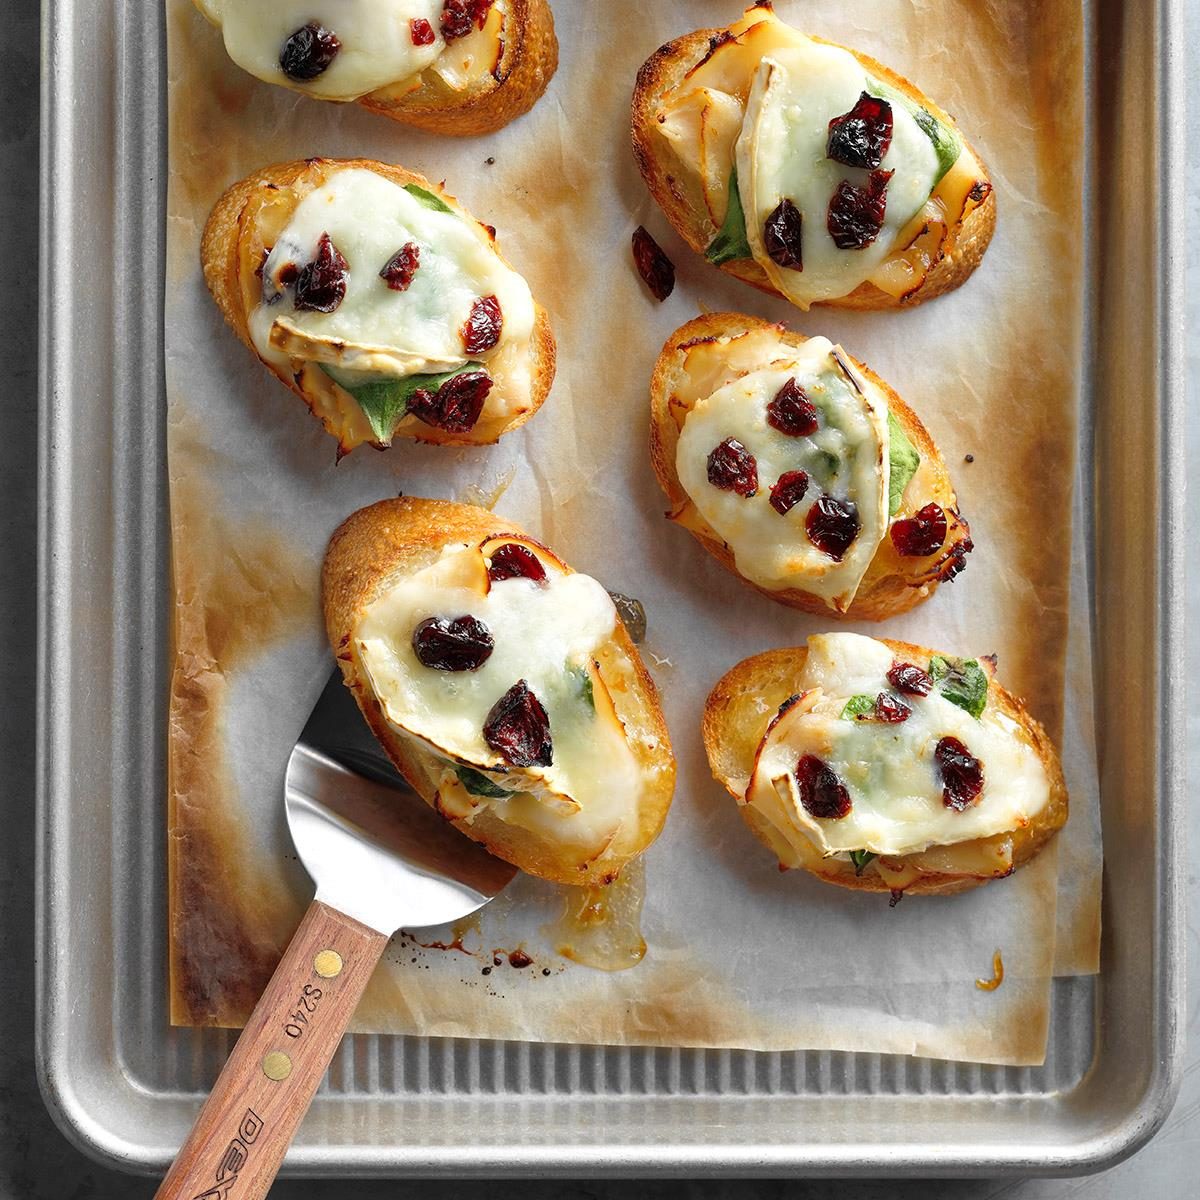 Roasted Chicken and Brie Holly Mini Bites